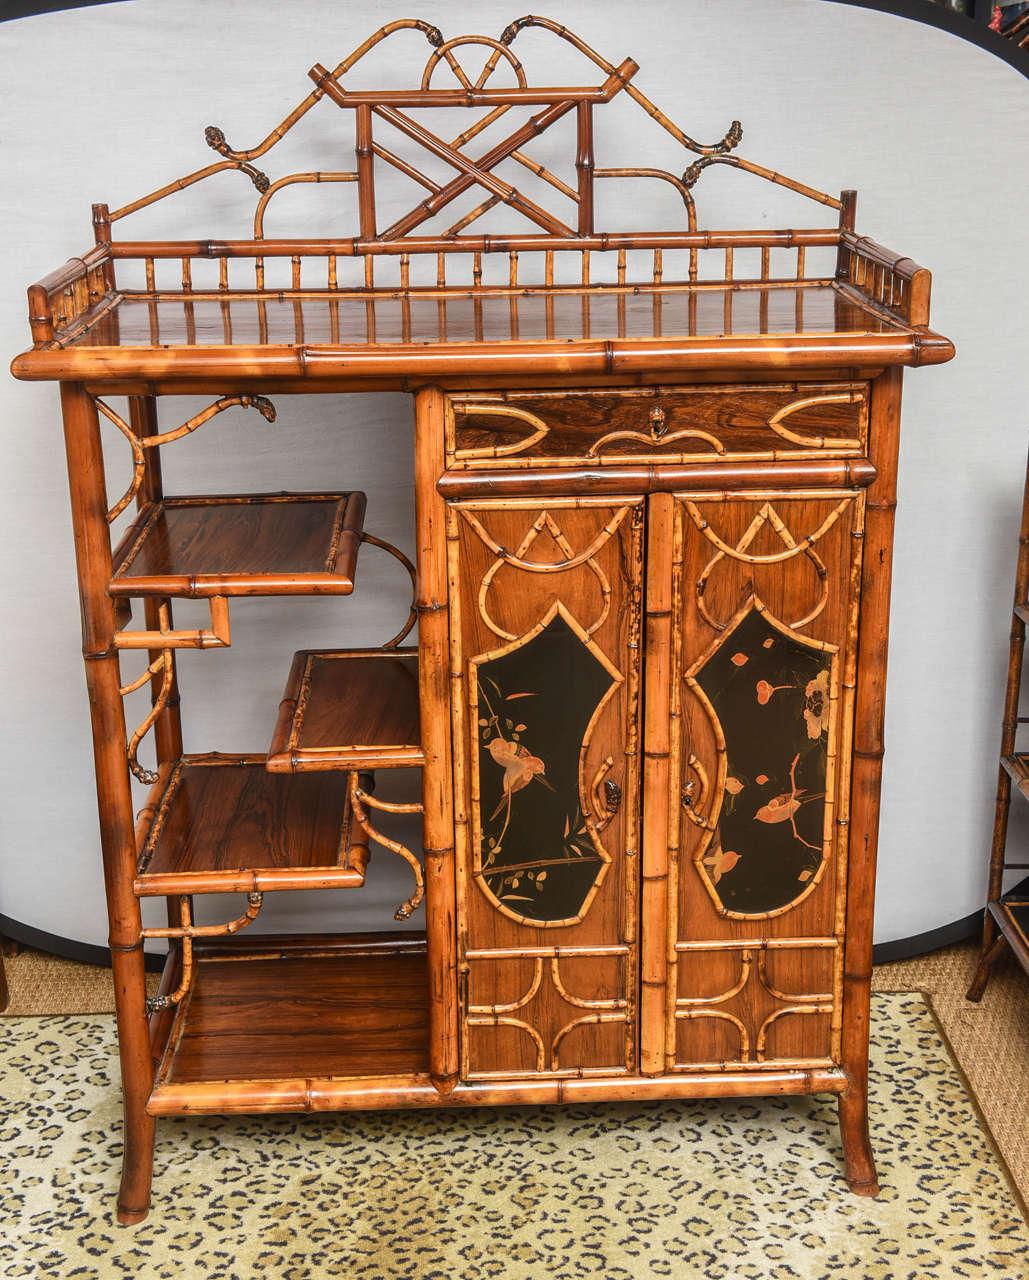 Superb English bamboo bookcase or cabinet with lacquer scene on doors and side. Beautiful bamboo roots on top.
Estate great piece!